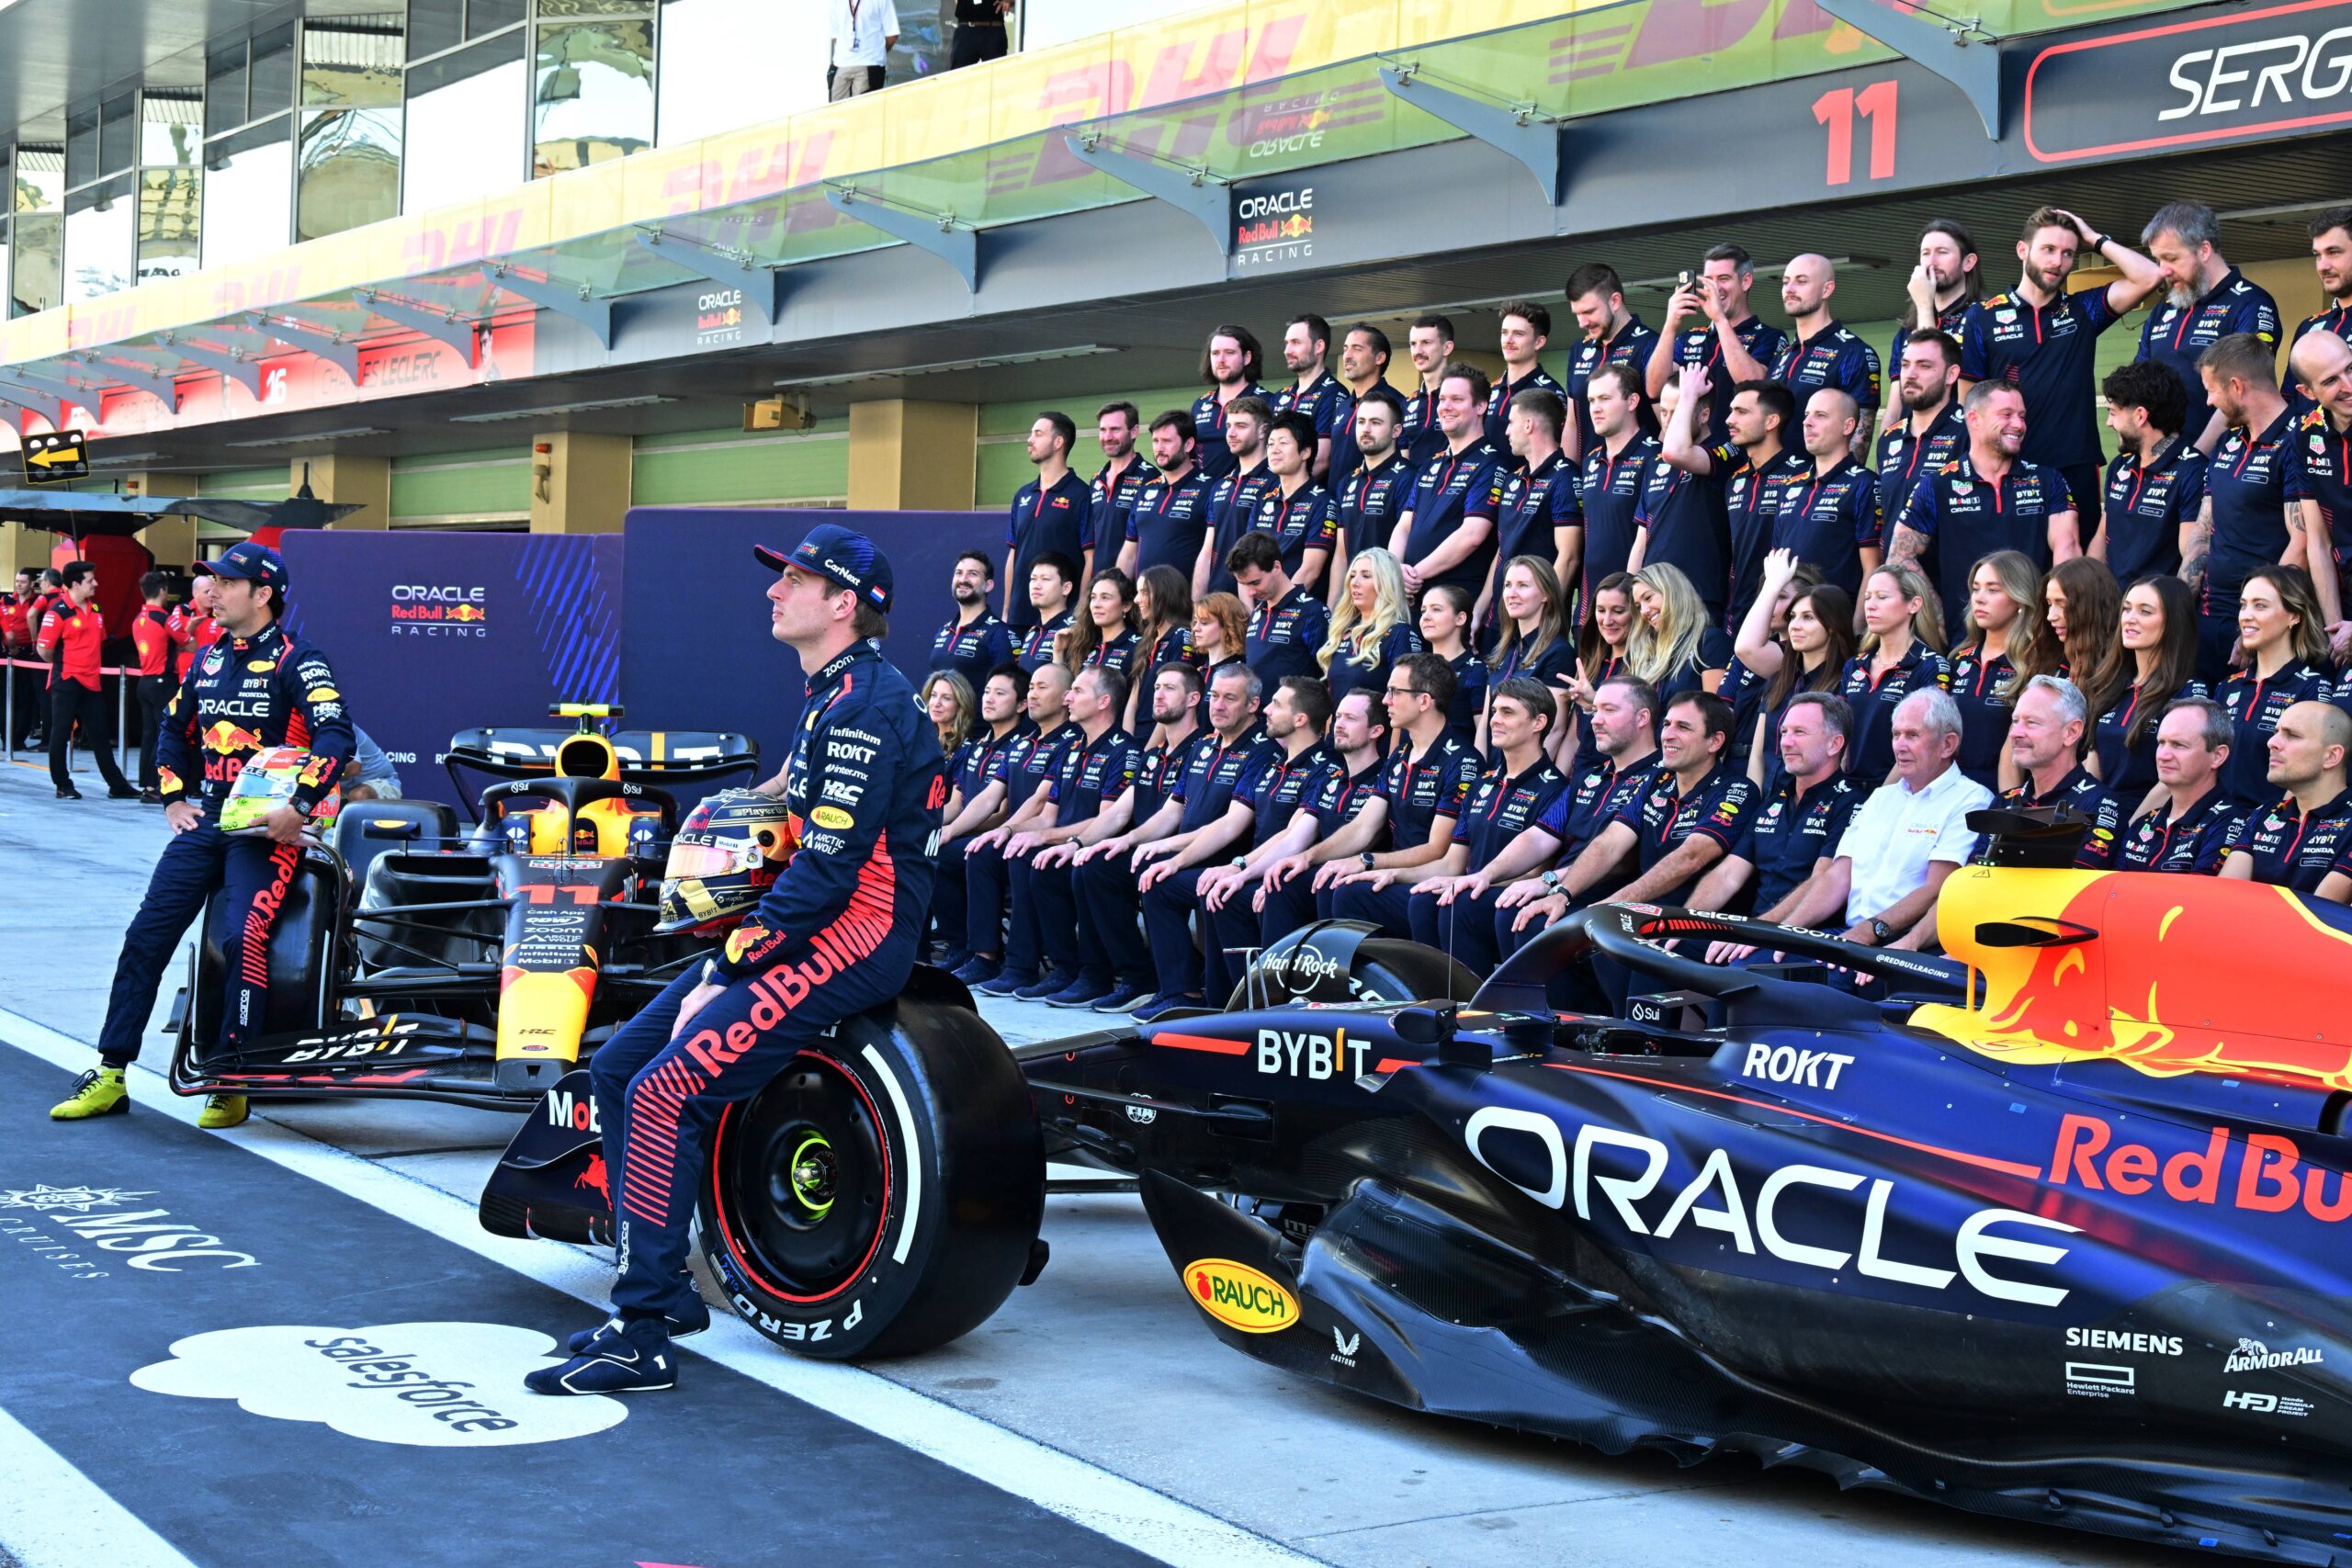 Max Verstappen wraps up record-breaking season with 19th win - DutchNews.nl